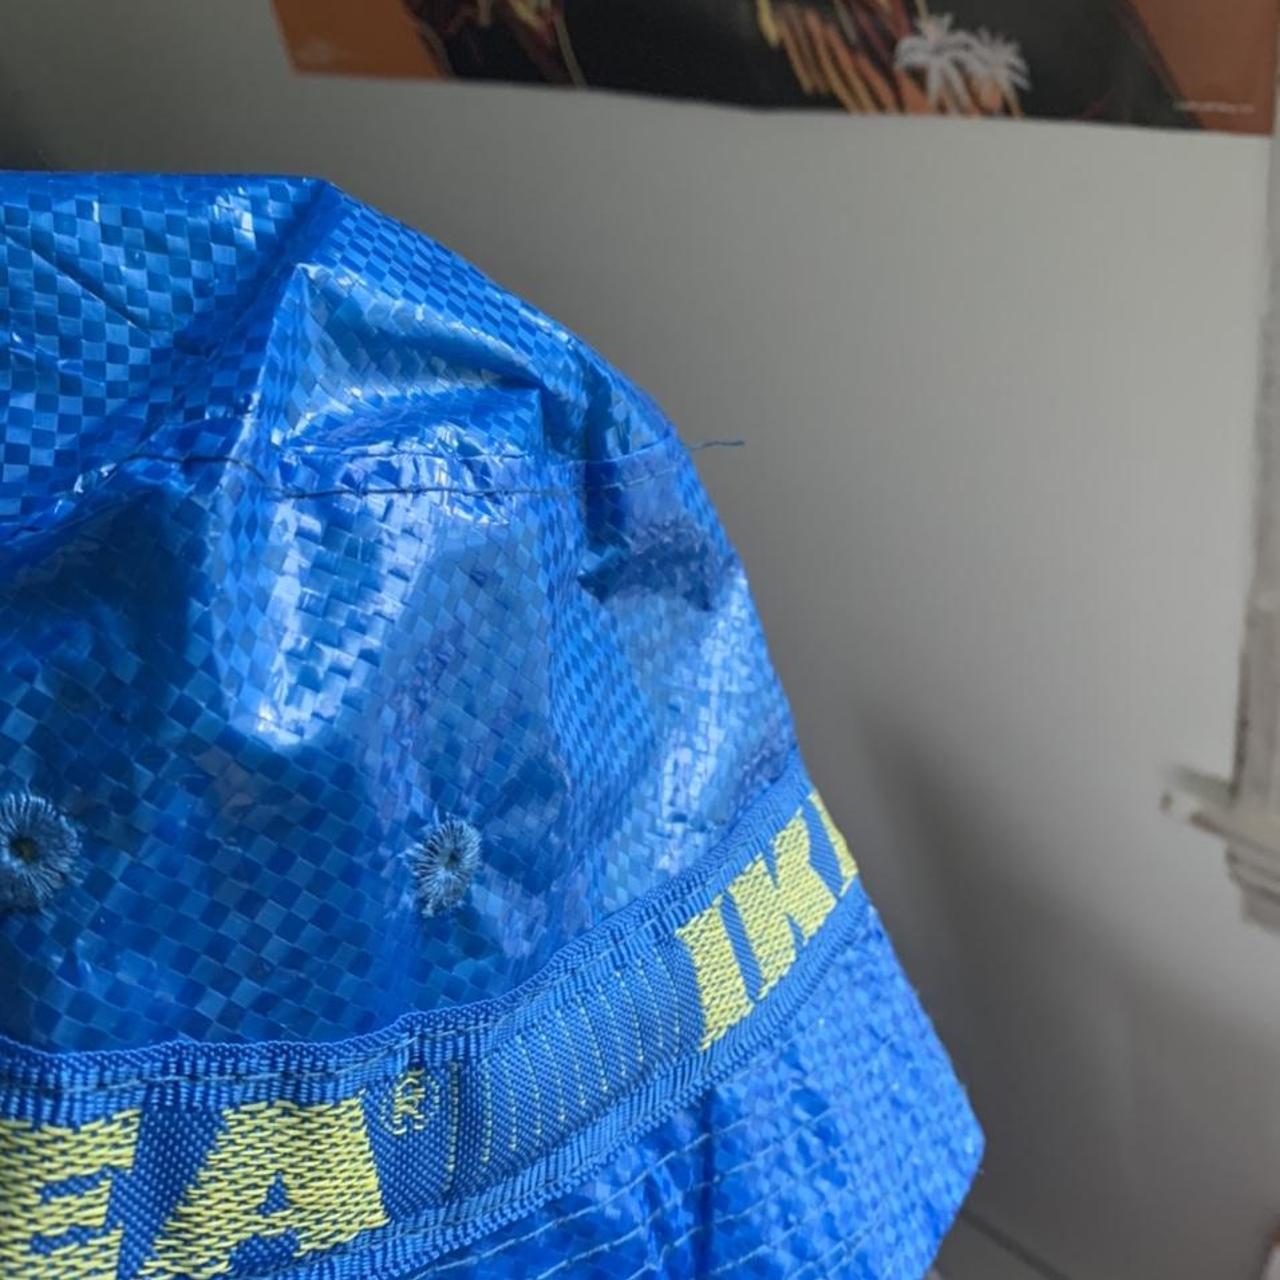 IKEA Women's Yellow and Blue Hat (2)